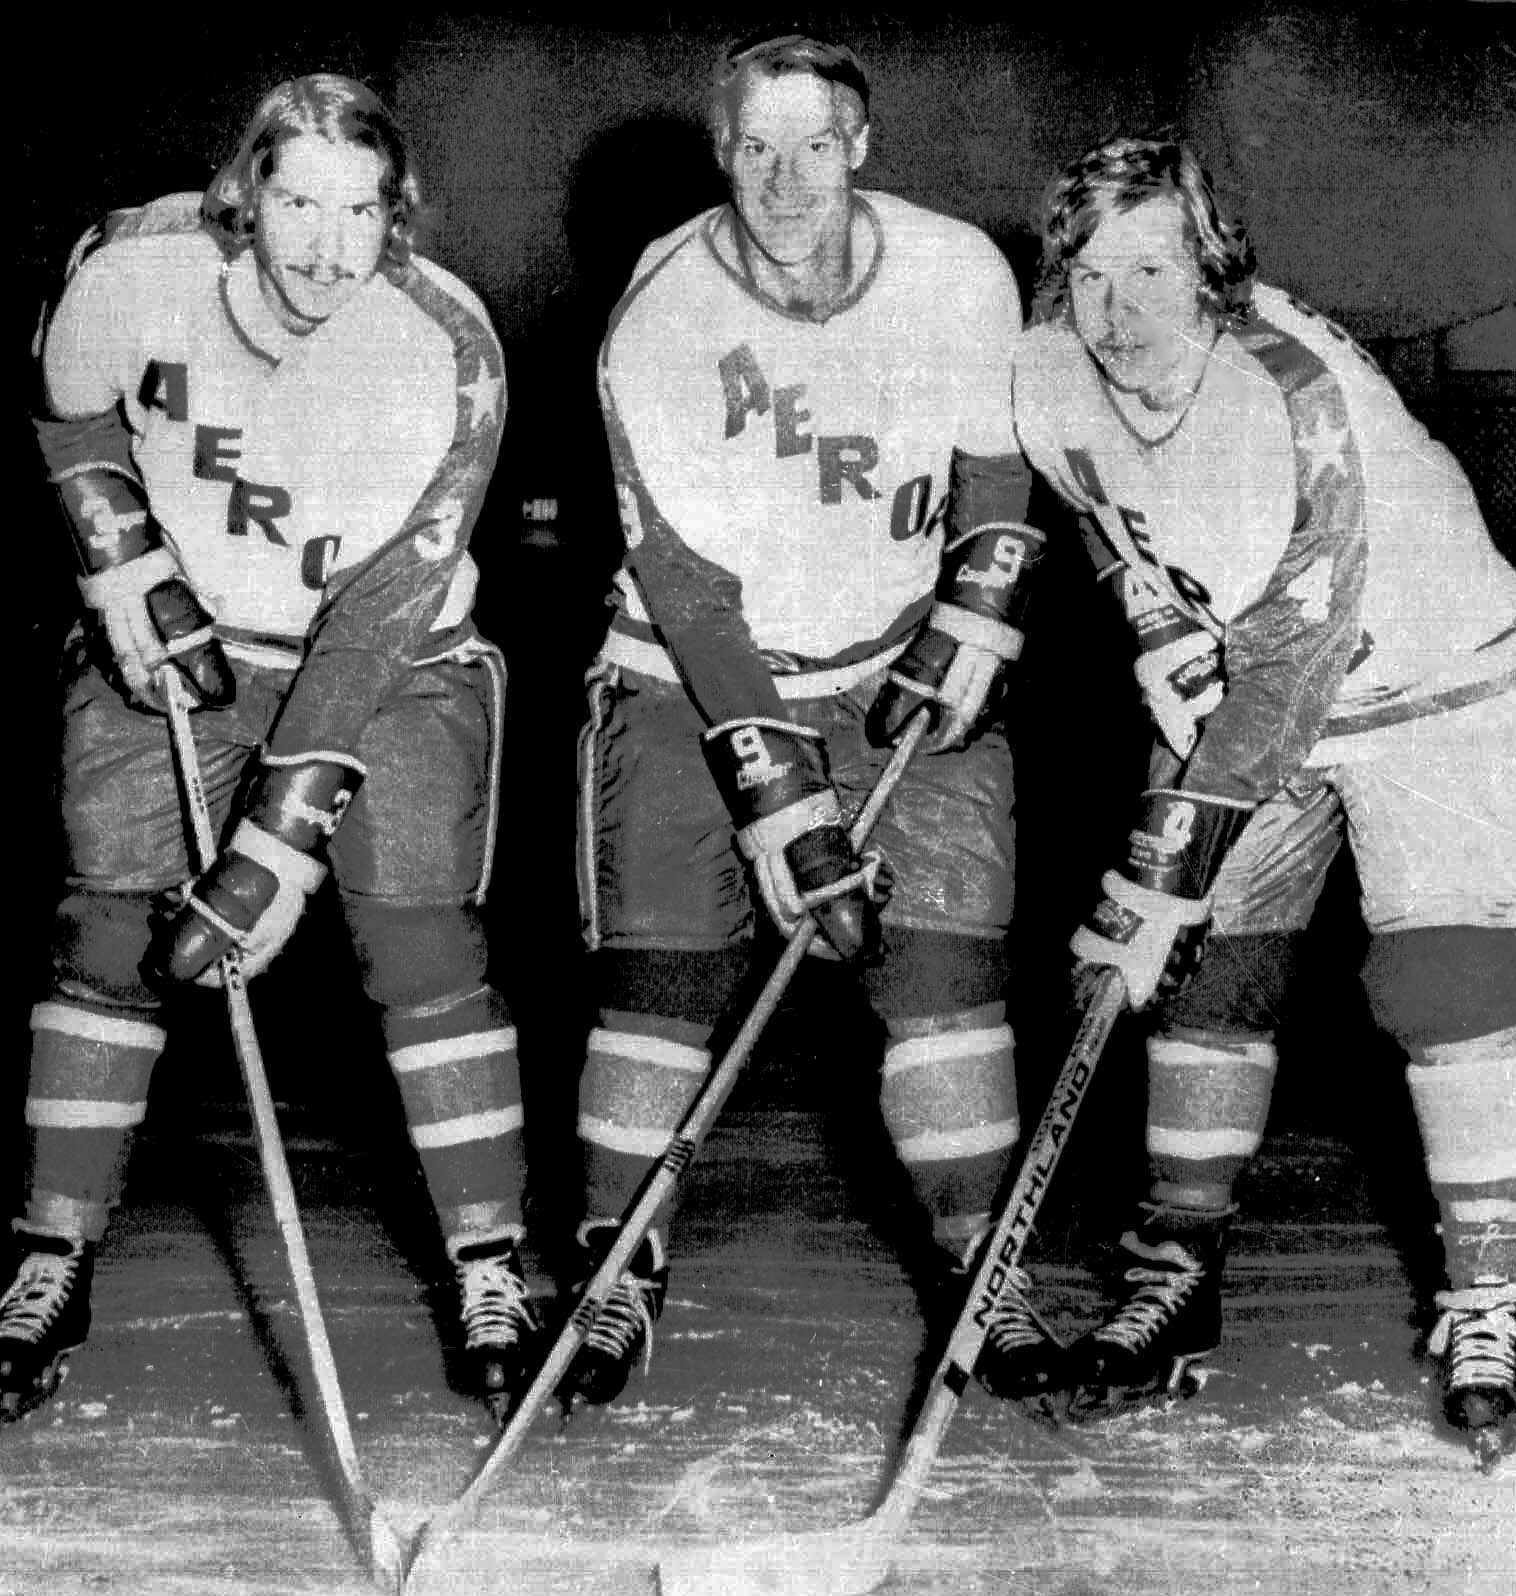 Lou Fontinato was the toughest NHL player of his time - The Globe